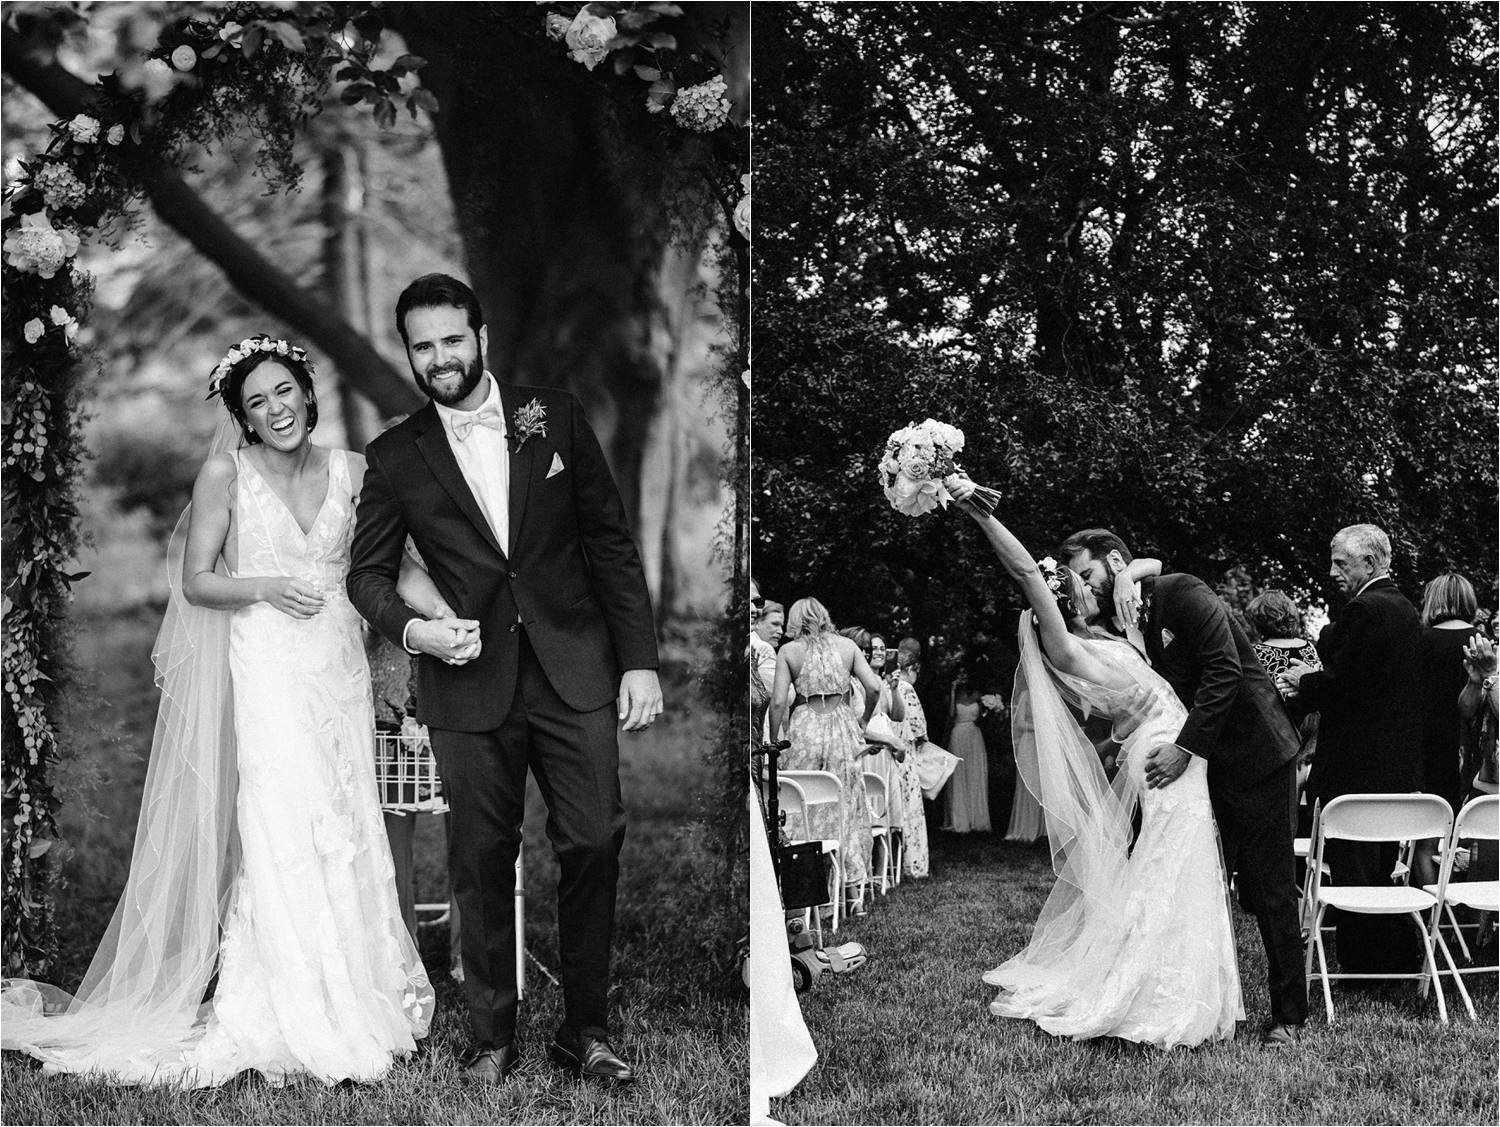 Black and white photos of bride and groom during recessional